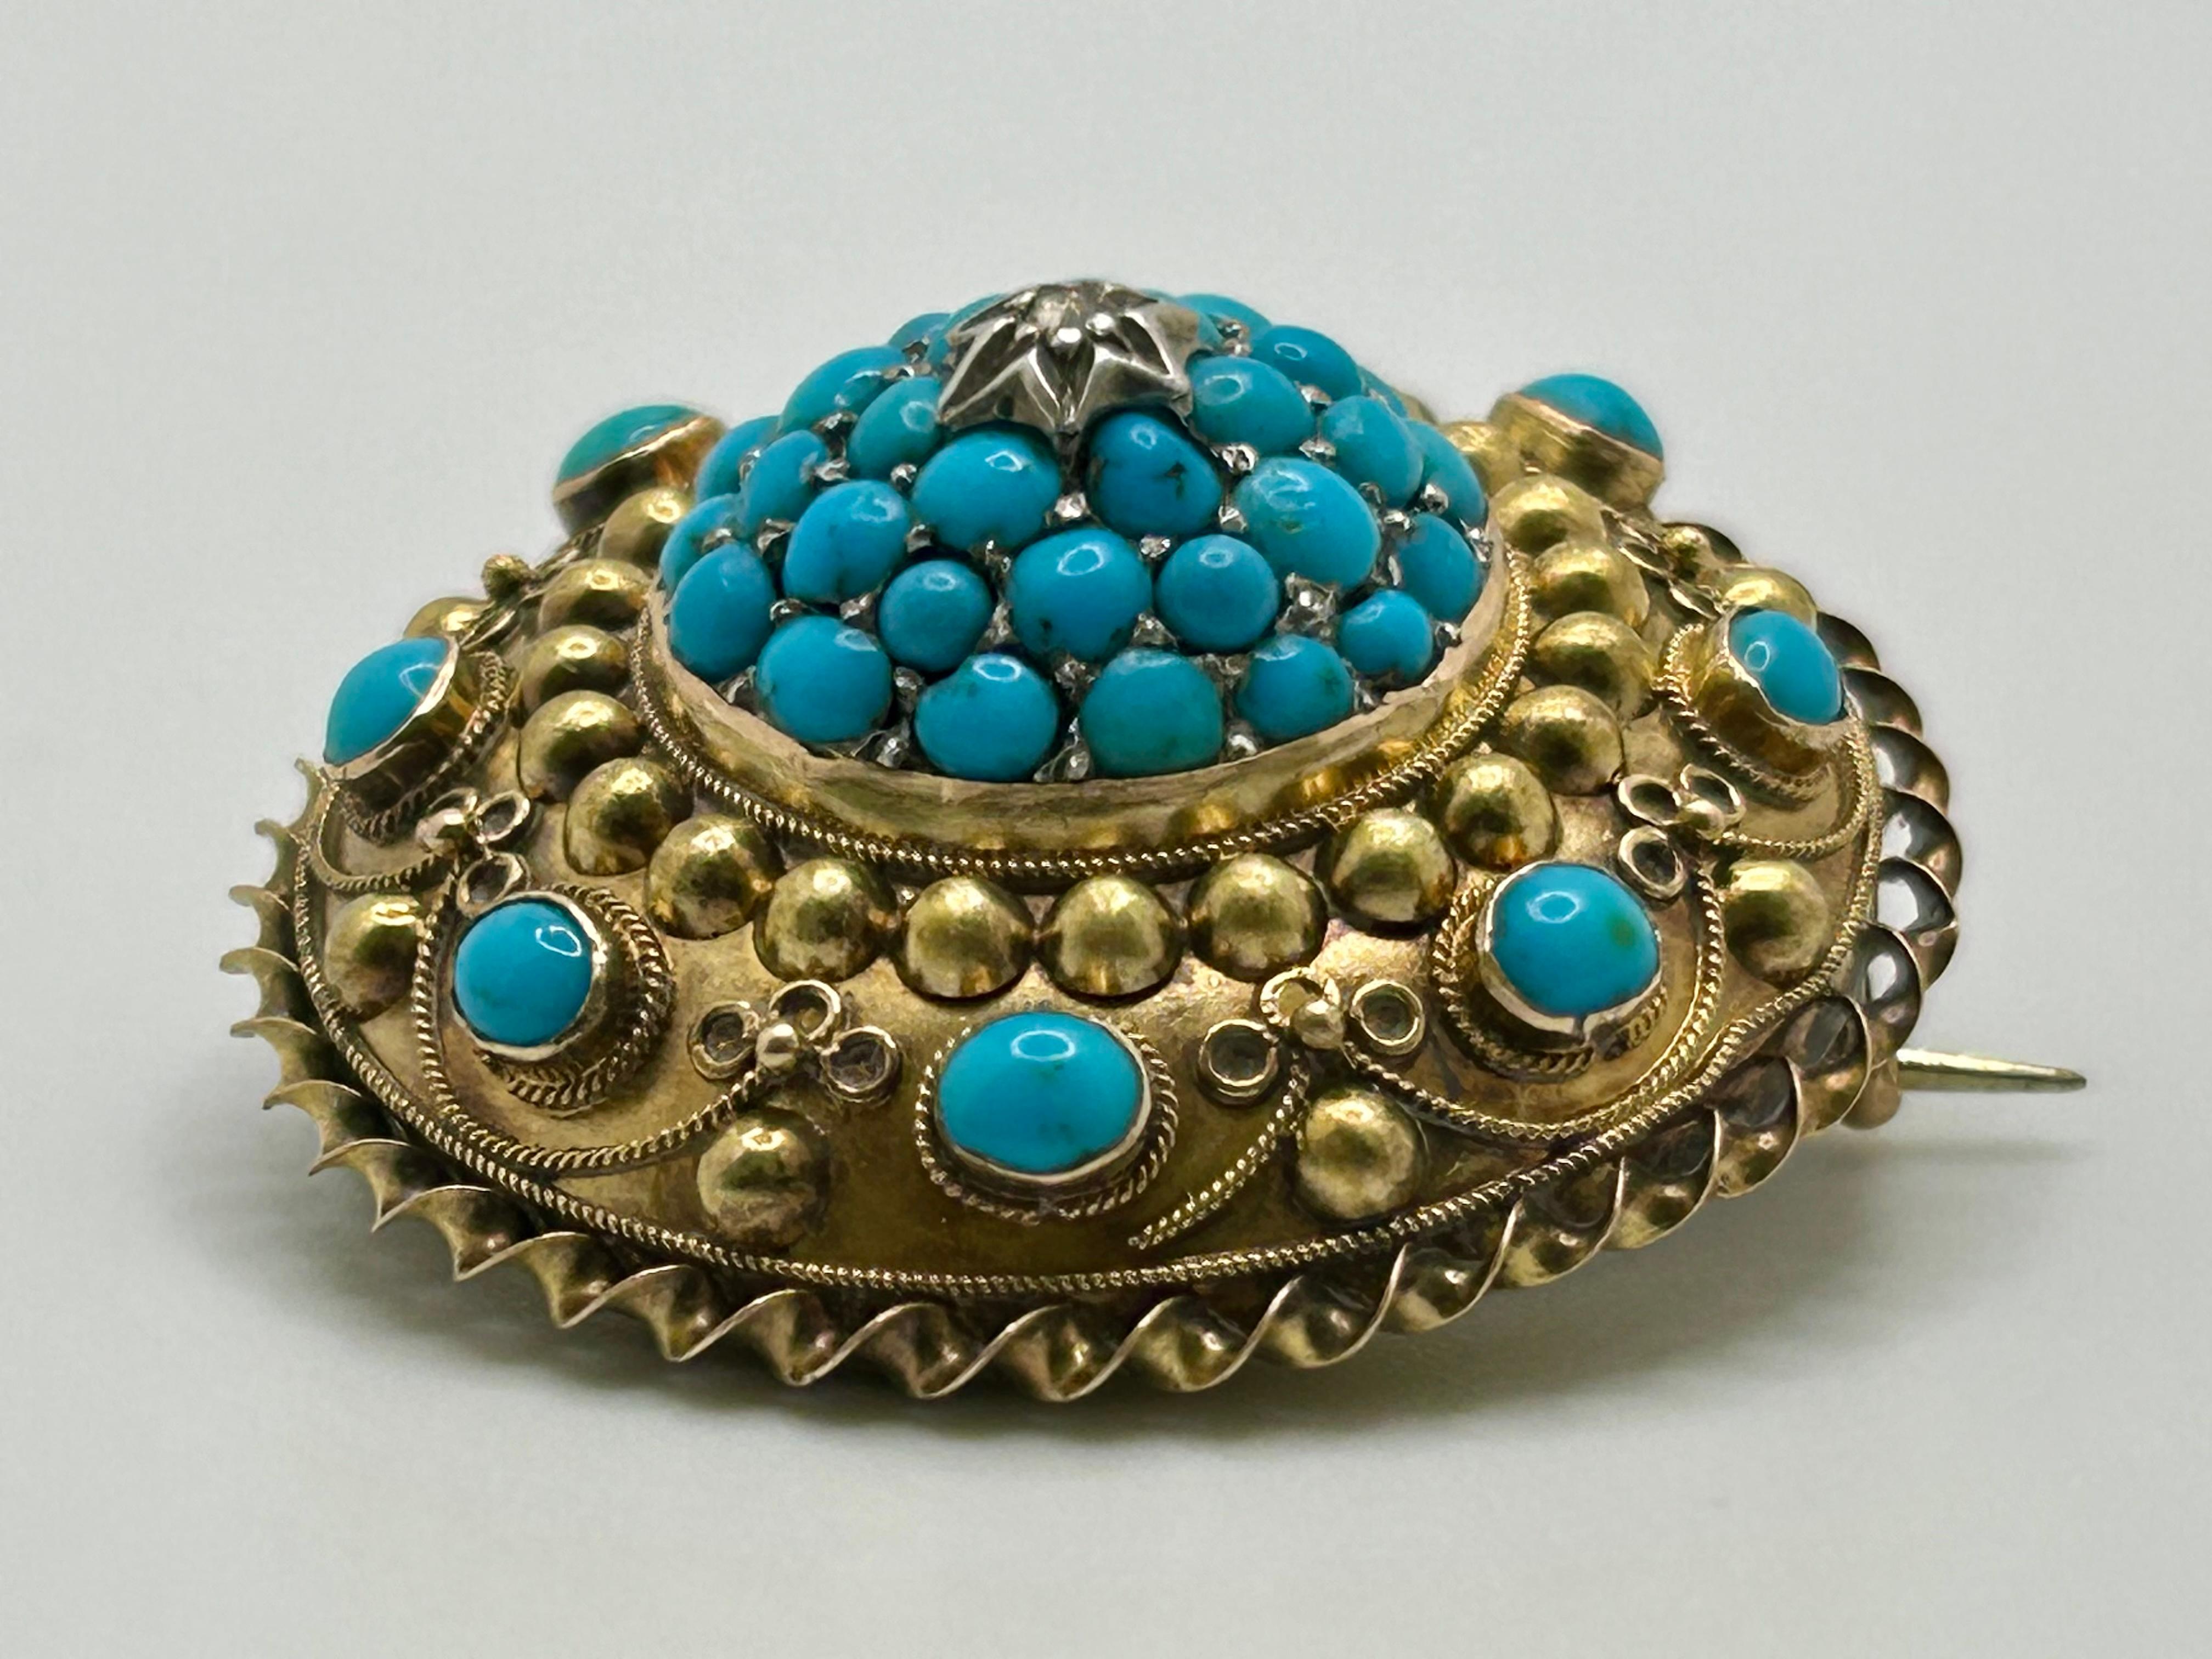 AN ANTIQUE TURQUOISE AND DIAMOND 18k BROOCH brooch. The domed body is set to the centre with a rose cut diamond on a ground of pave set cabochon turquoise, accented by further cabochon turquoise and intricately beaded and twisted gold, with a glass